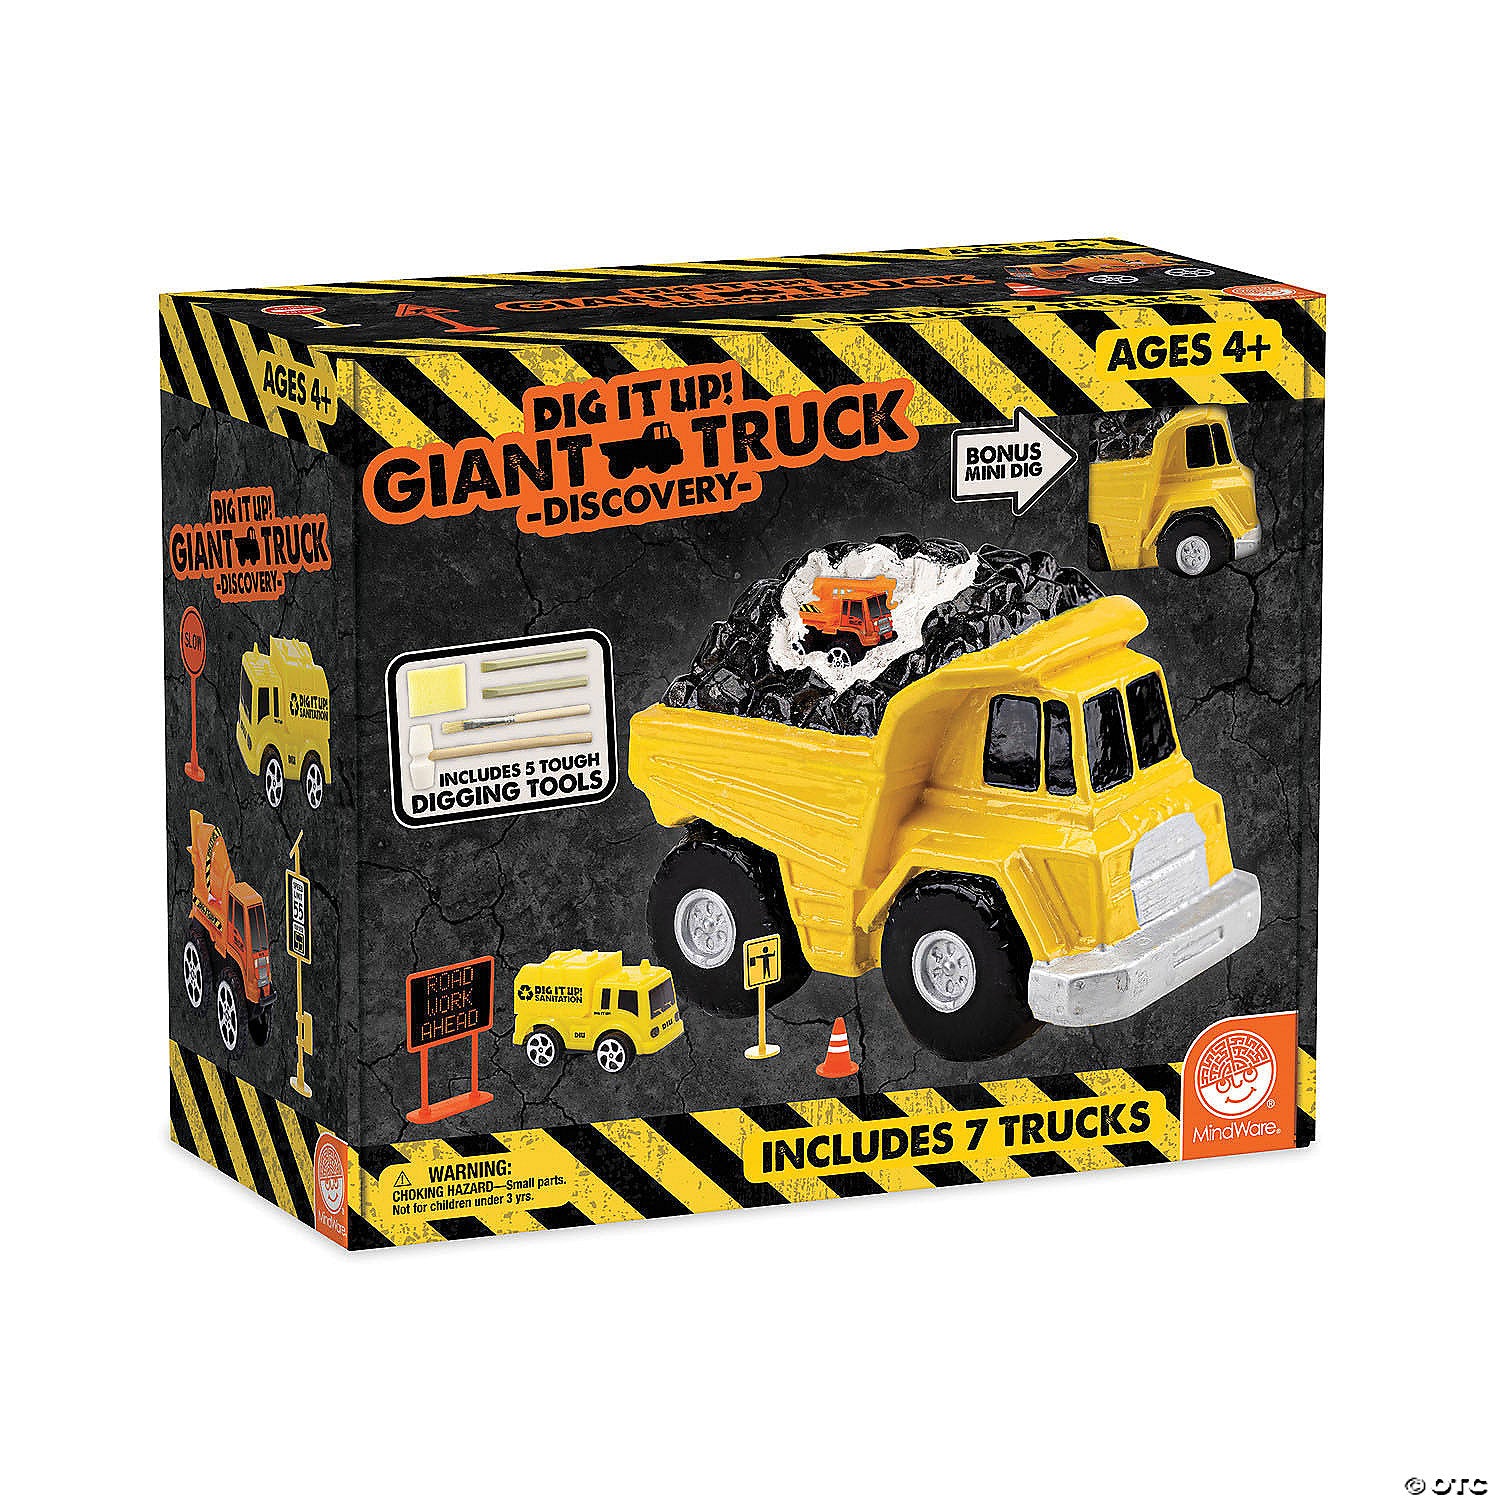 Dig It Up ! Giant Truck Discovery